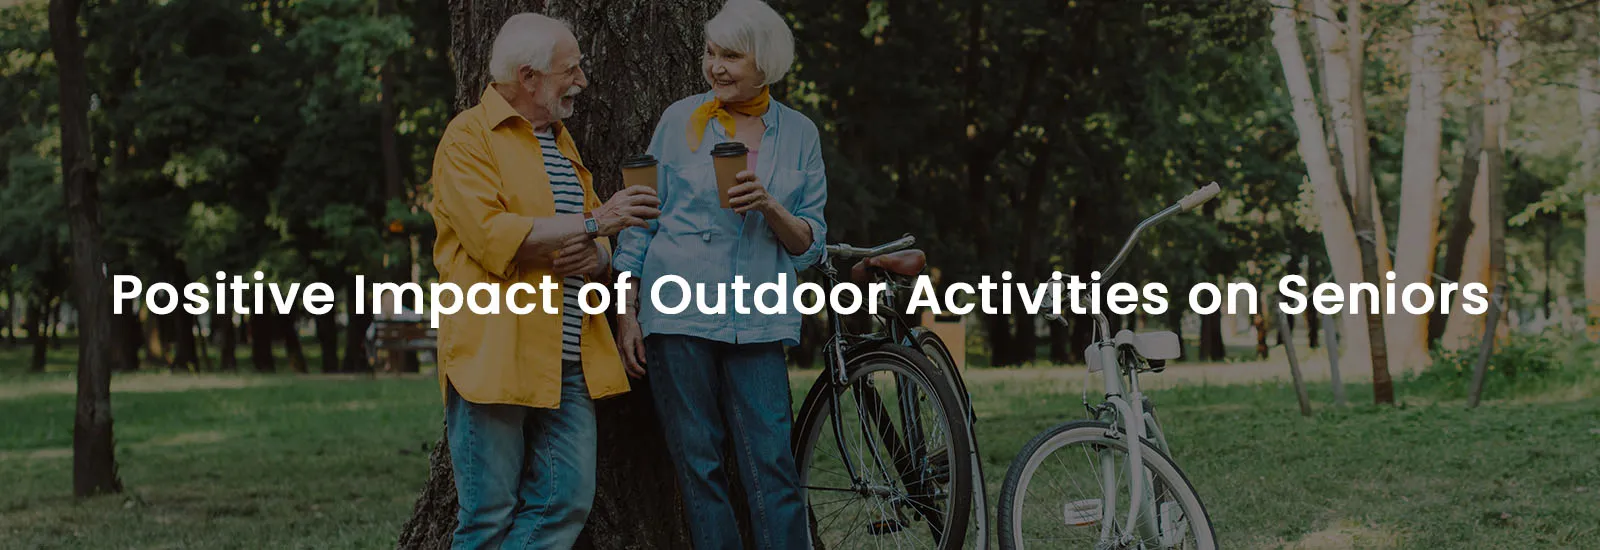 Positive Impact of Outdoor Activities on Seniors | Banner Image